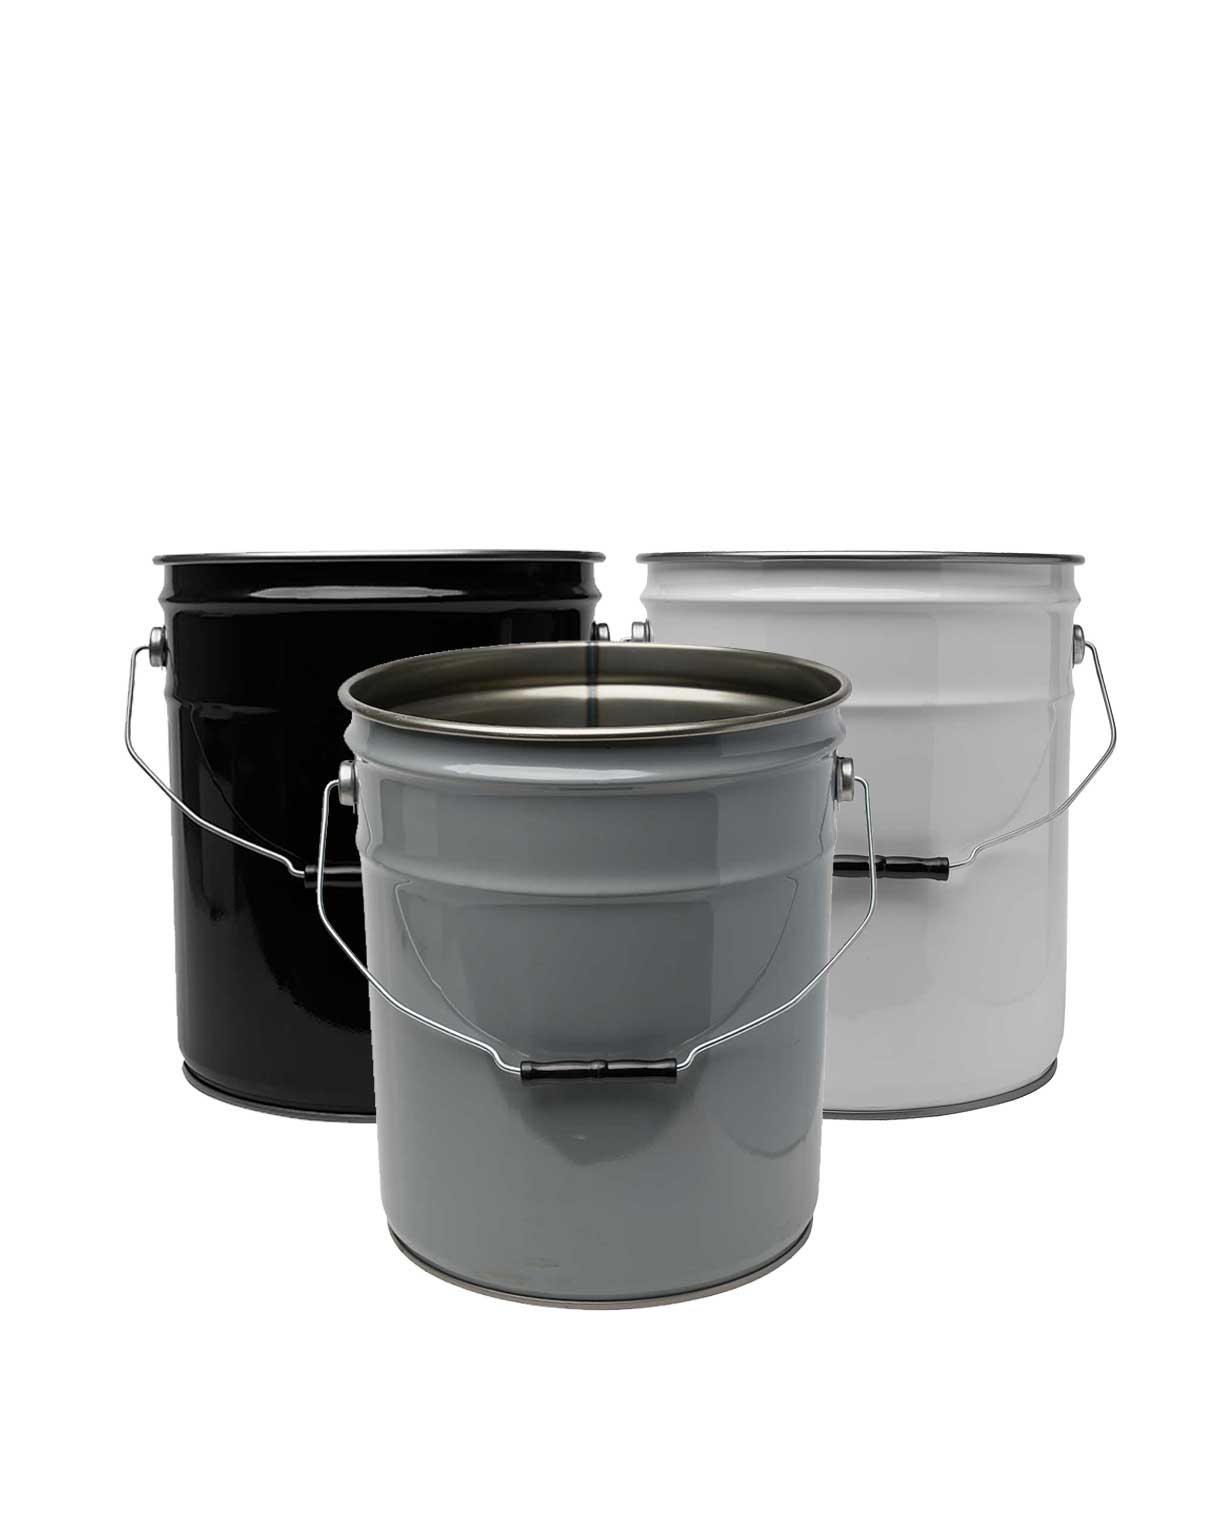 Bucket & Pail Tools and Accessories, Bulk & Wholesale Available